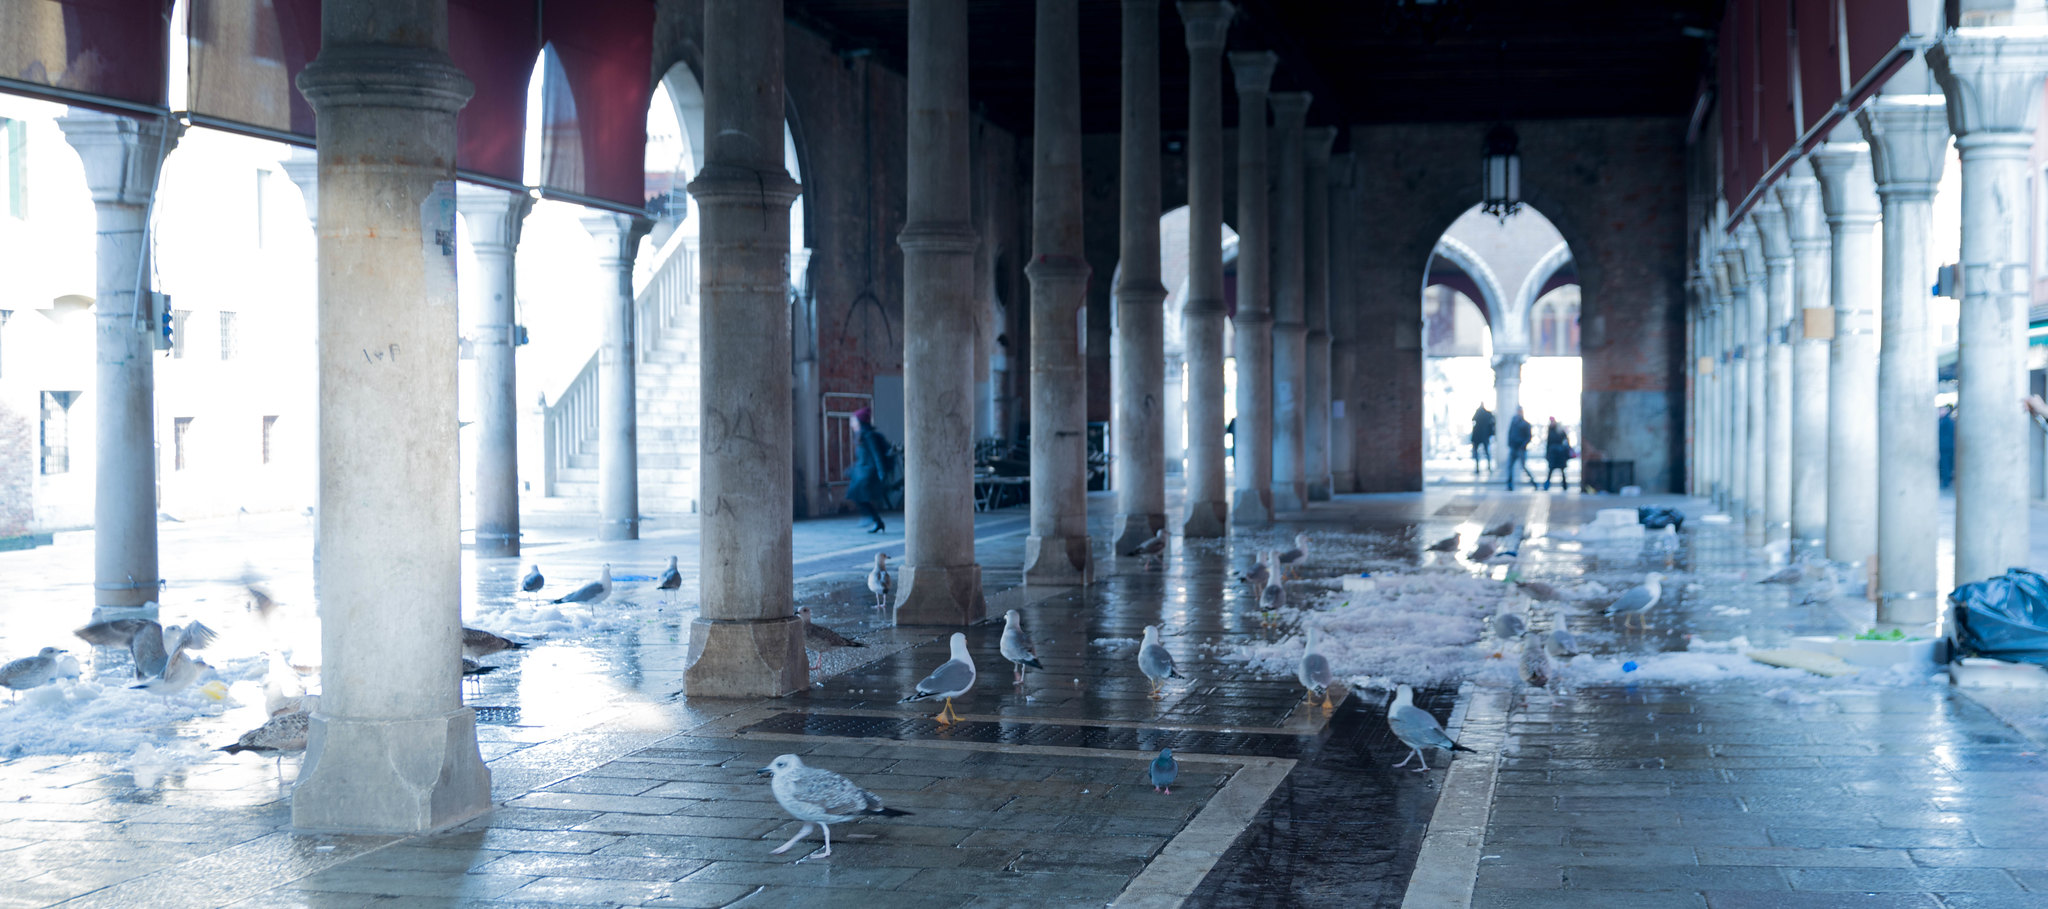 Fish market after the crowds have left. Venice italy